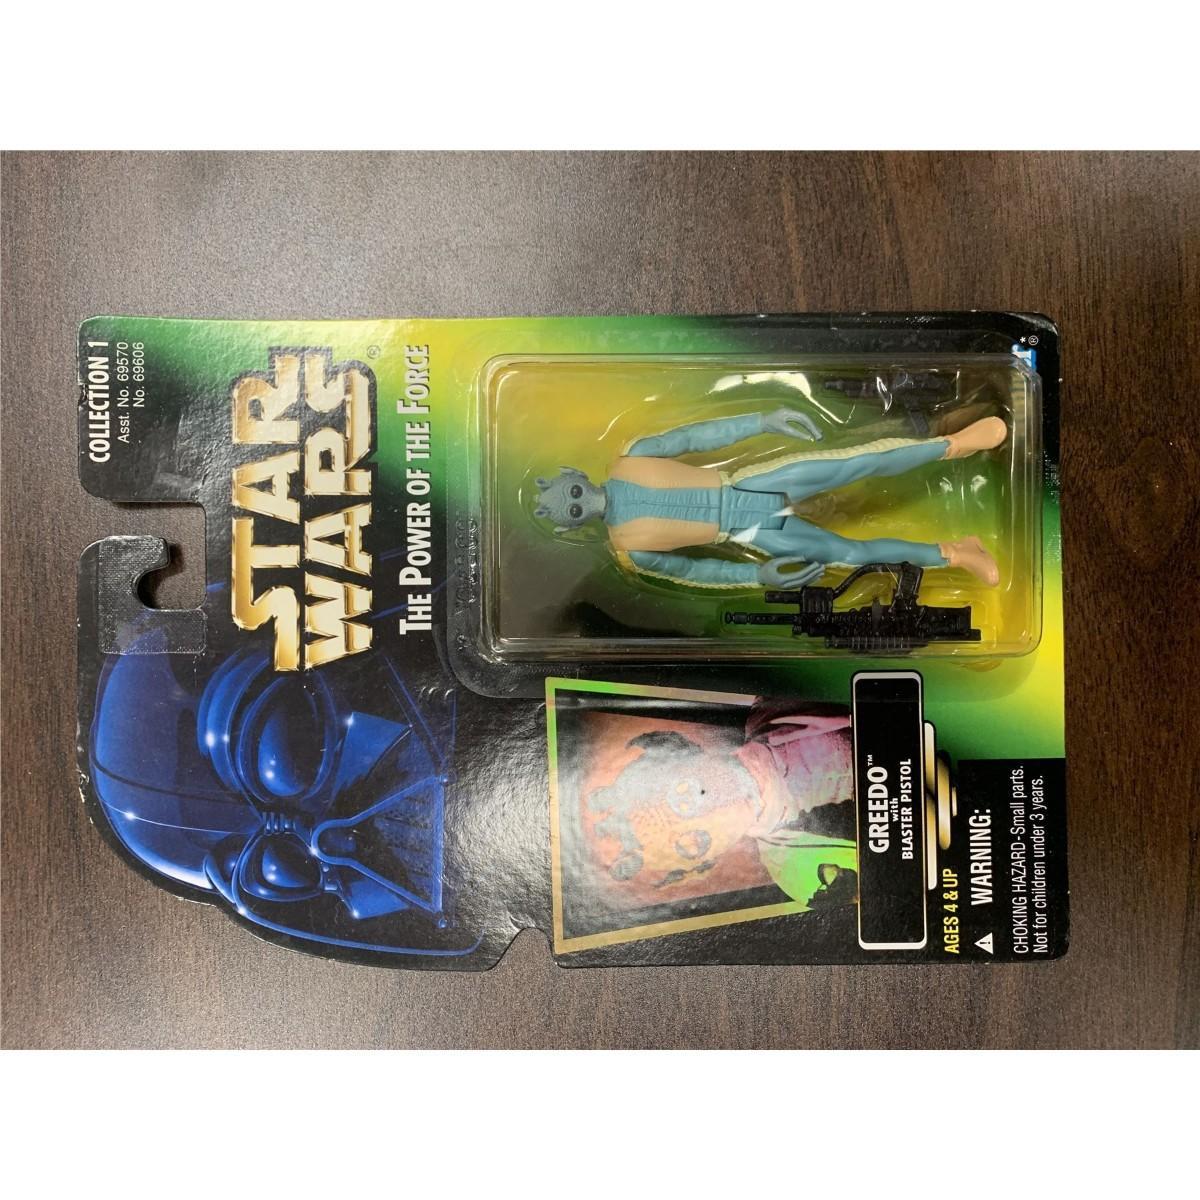 Photo 1 of Star Wars unsigned Greedo action figure